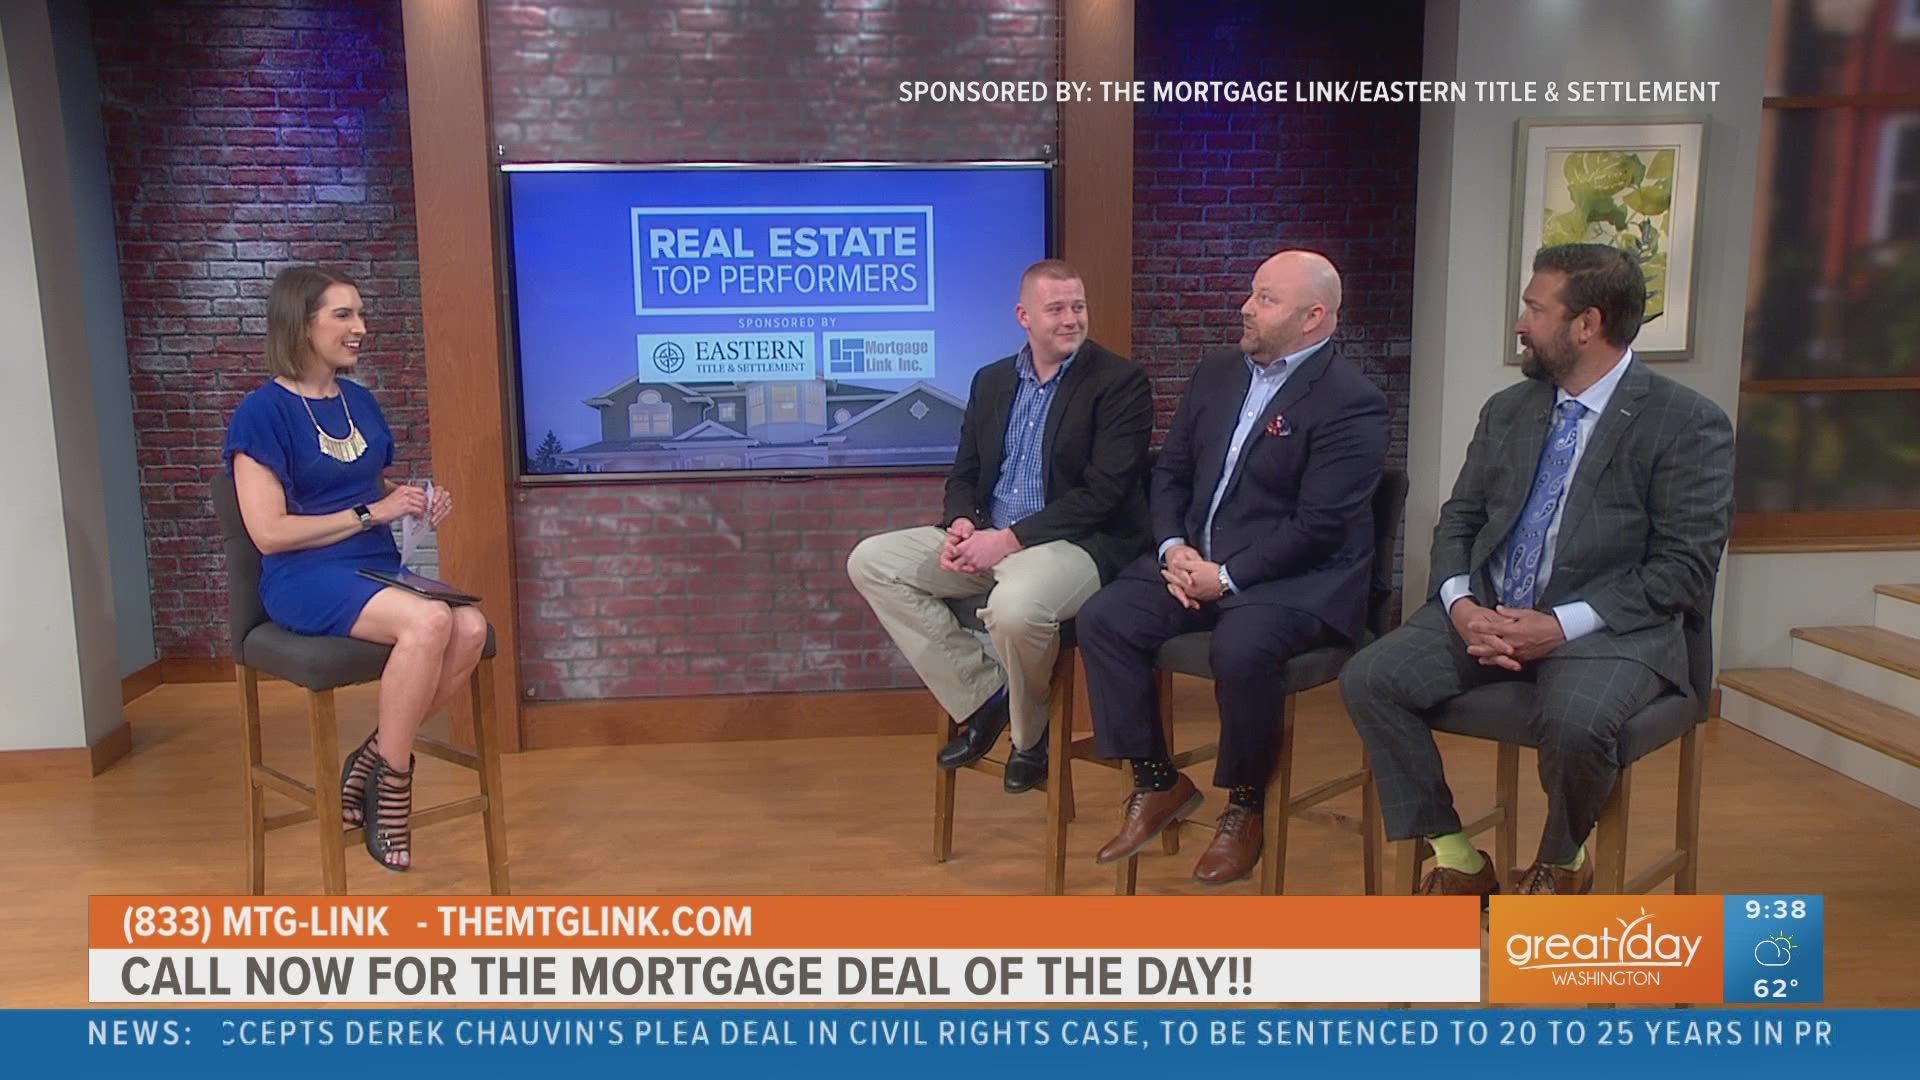 James Nellis of The Nellis Group explains the top strategies to help buy and sell in today's market. Sponsored by Eastern Title & Settlement and The Mortgage Link.